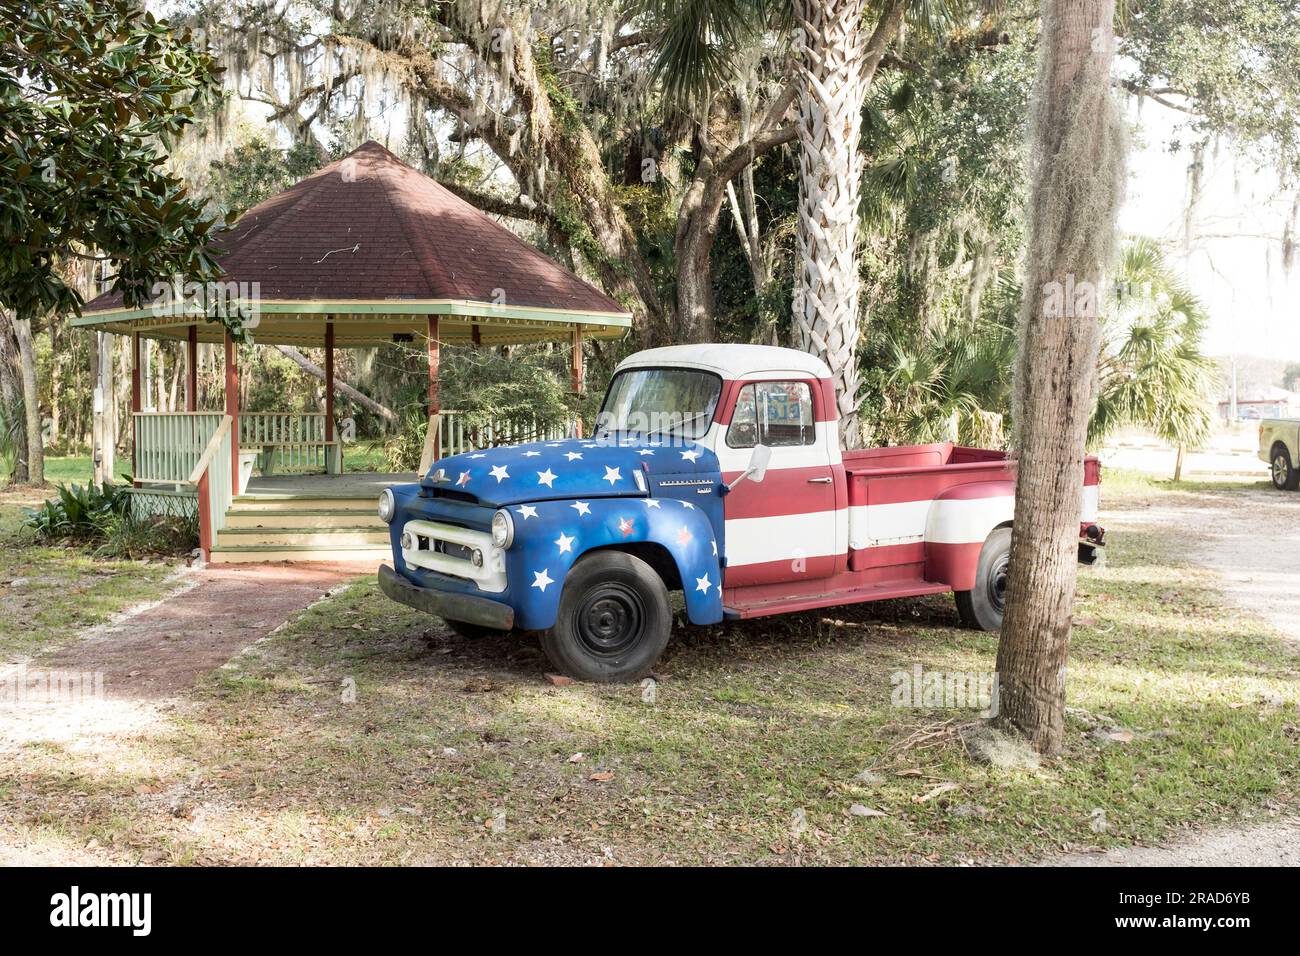 Stars and stripes vintage pick up truck Stock Photo